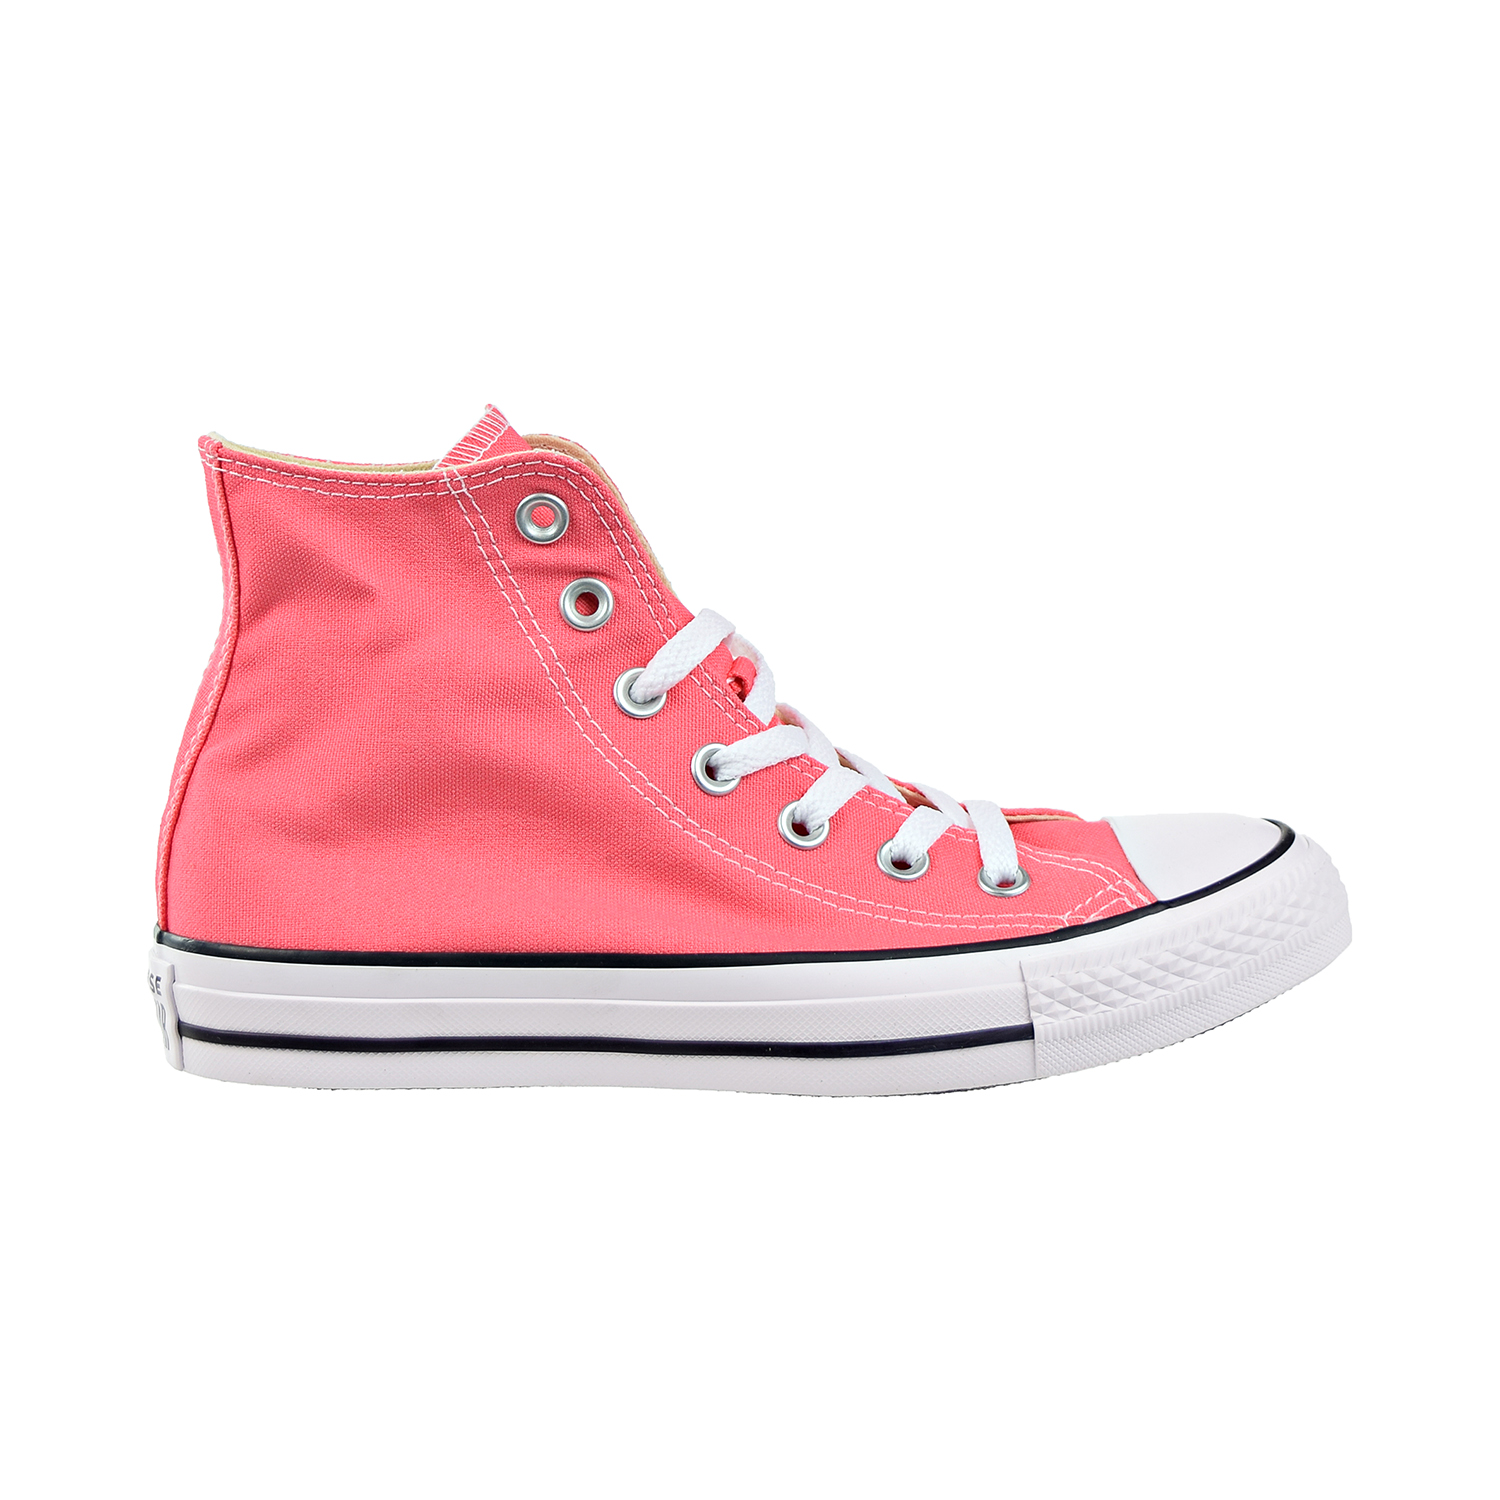 coral colored converse shoes